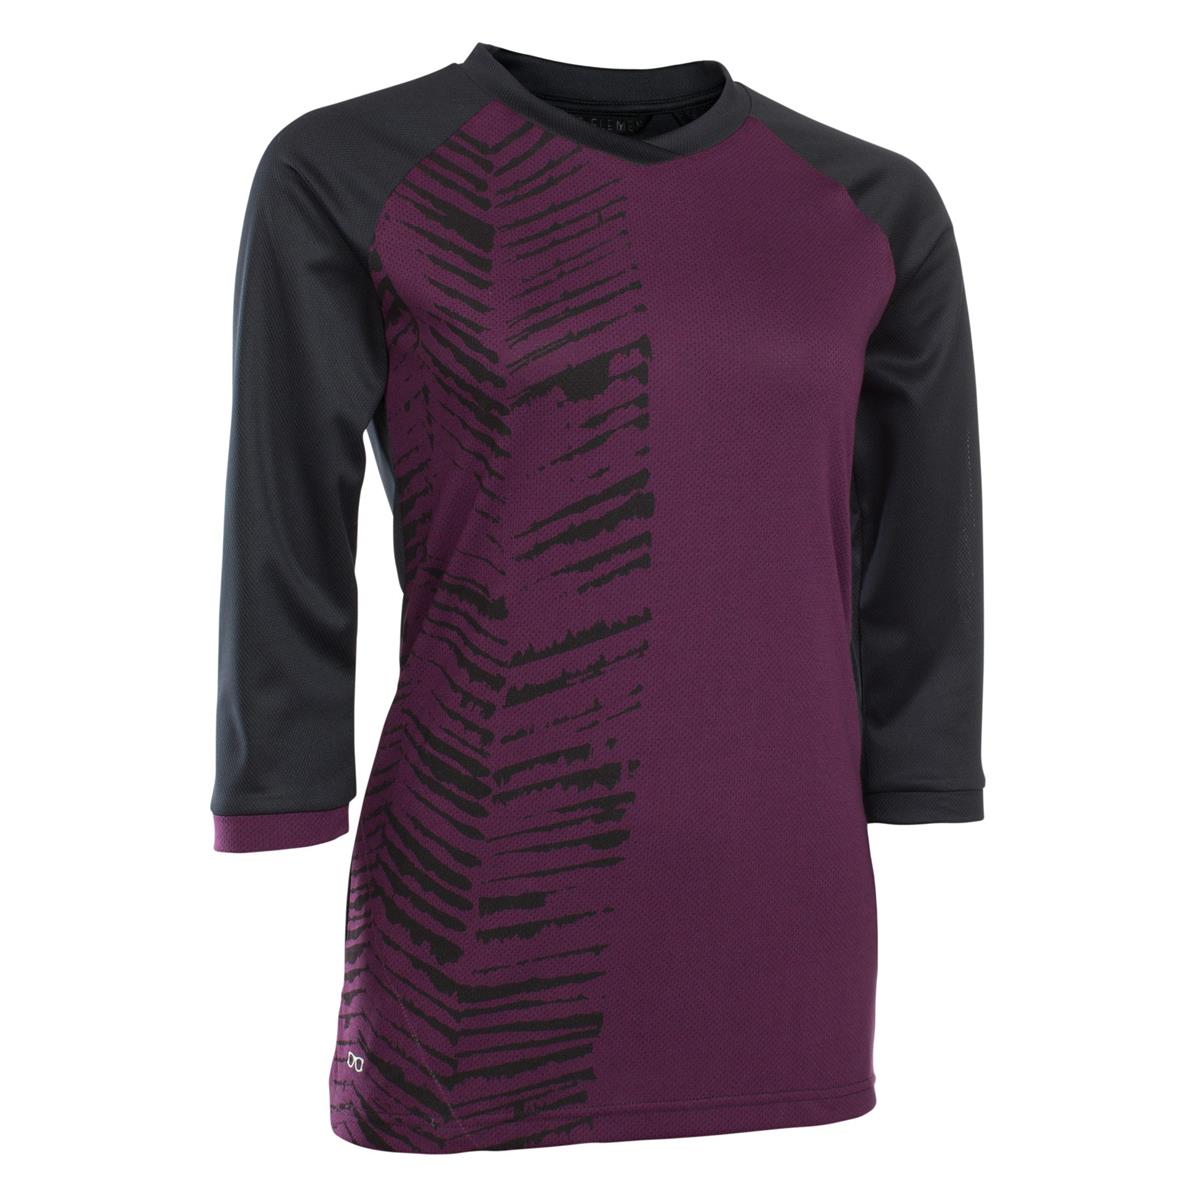 ION Girls Freeride Jersey 3/4 Sleeve Scrub Amp Pink Isover